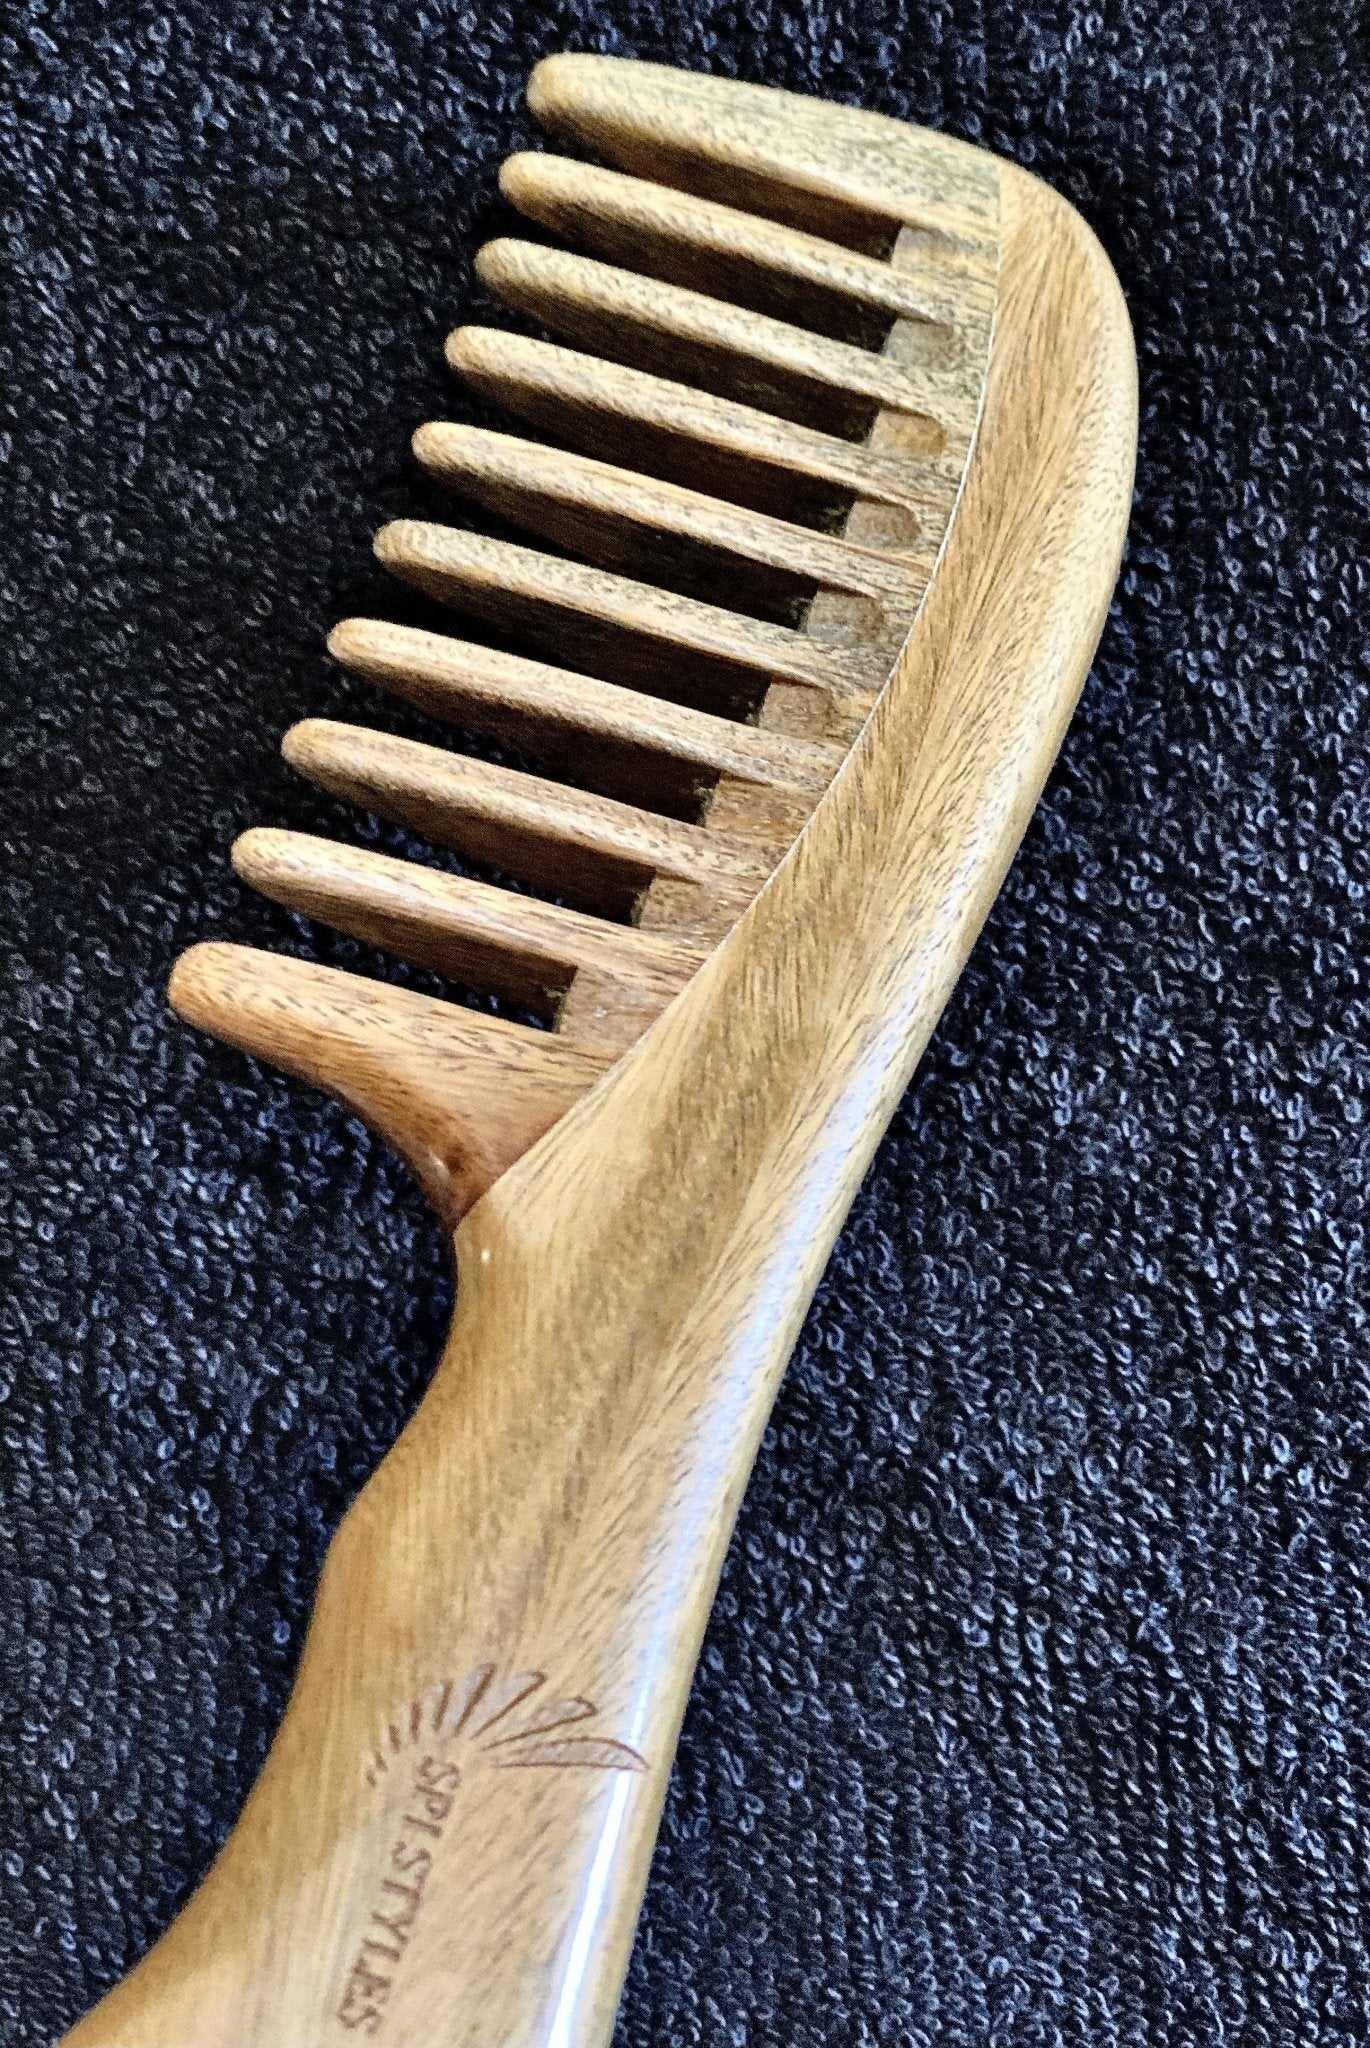 wooden hair brush for curly hair, hair comb wide tooth comb in amazon, detangling hair brush for curly hair, wide tooth wooden comb for curly hair, detangling hair comb, wide tooth comb for thin hair,  beautiful hair combs, fine tooth hair comb, wide tooth comb brush